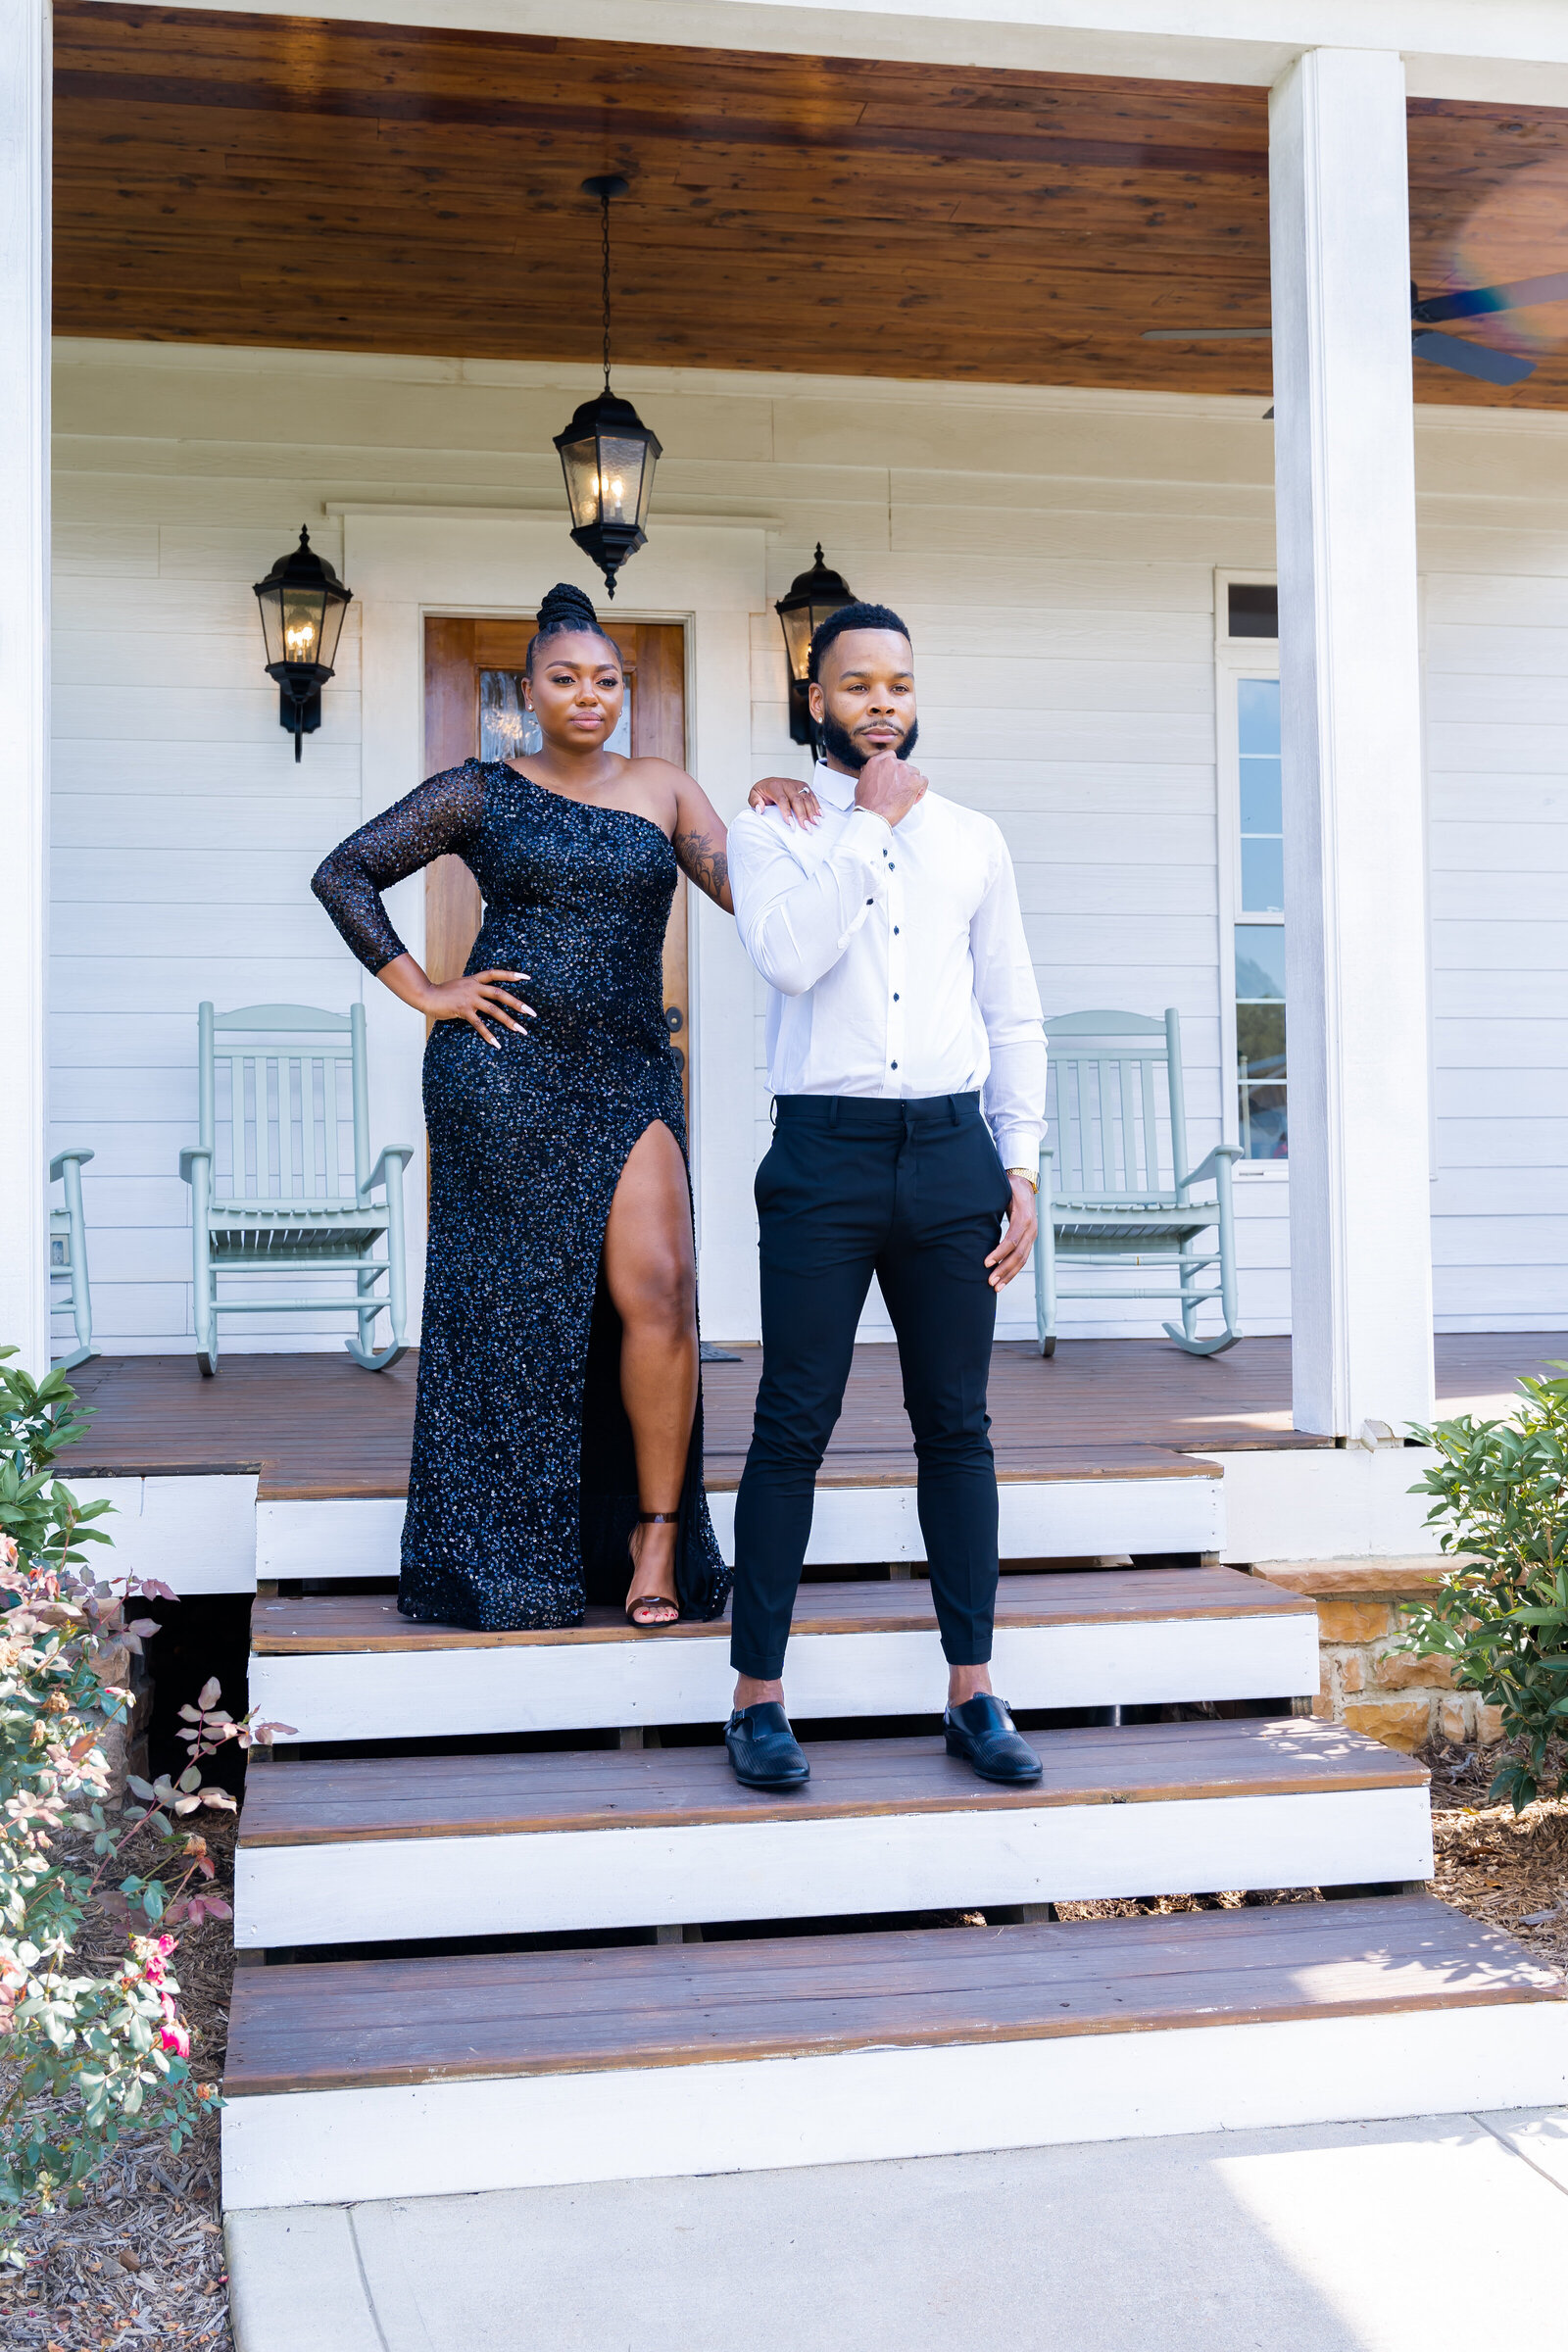 Engagement photoshoot, man wearing black and white suit, woman wearing black sequin dress